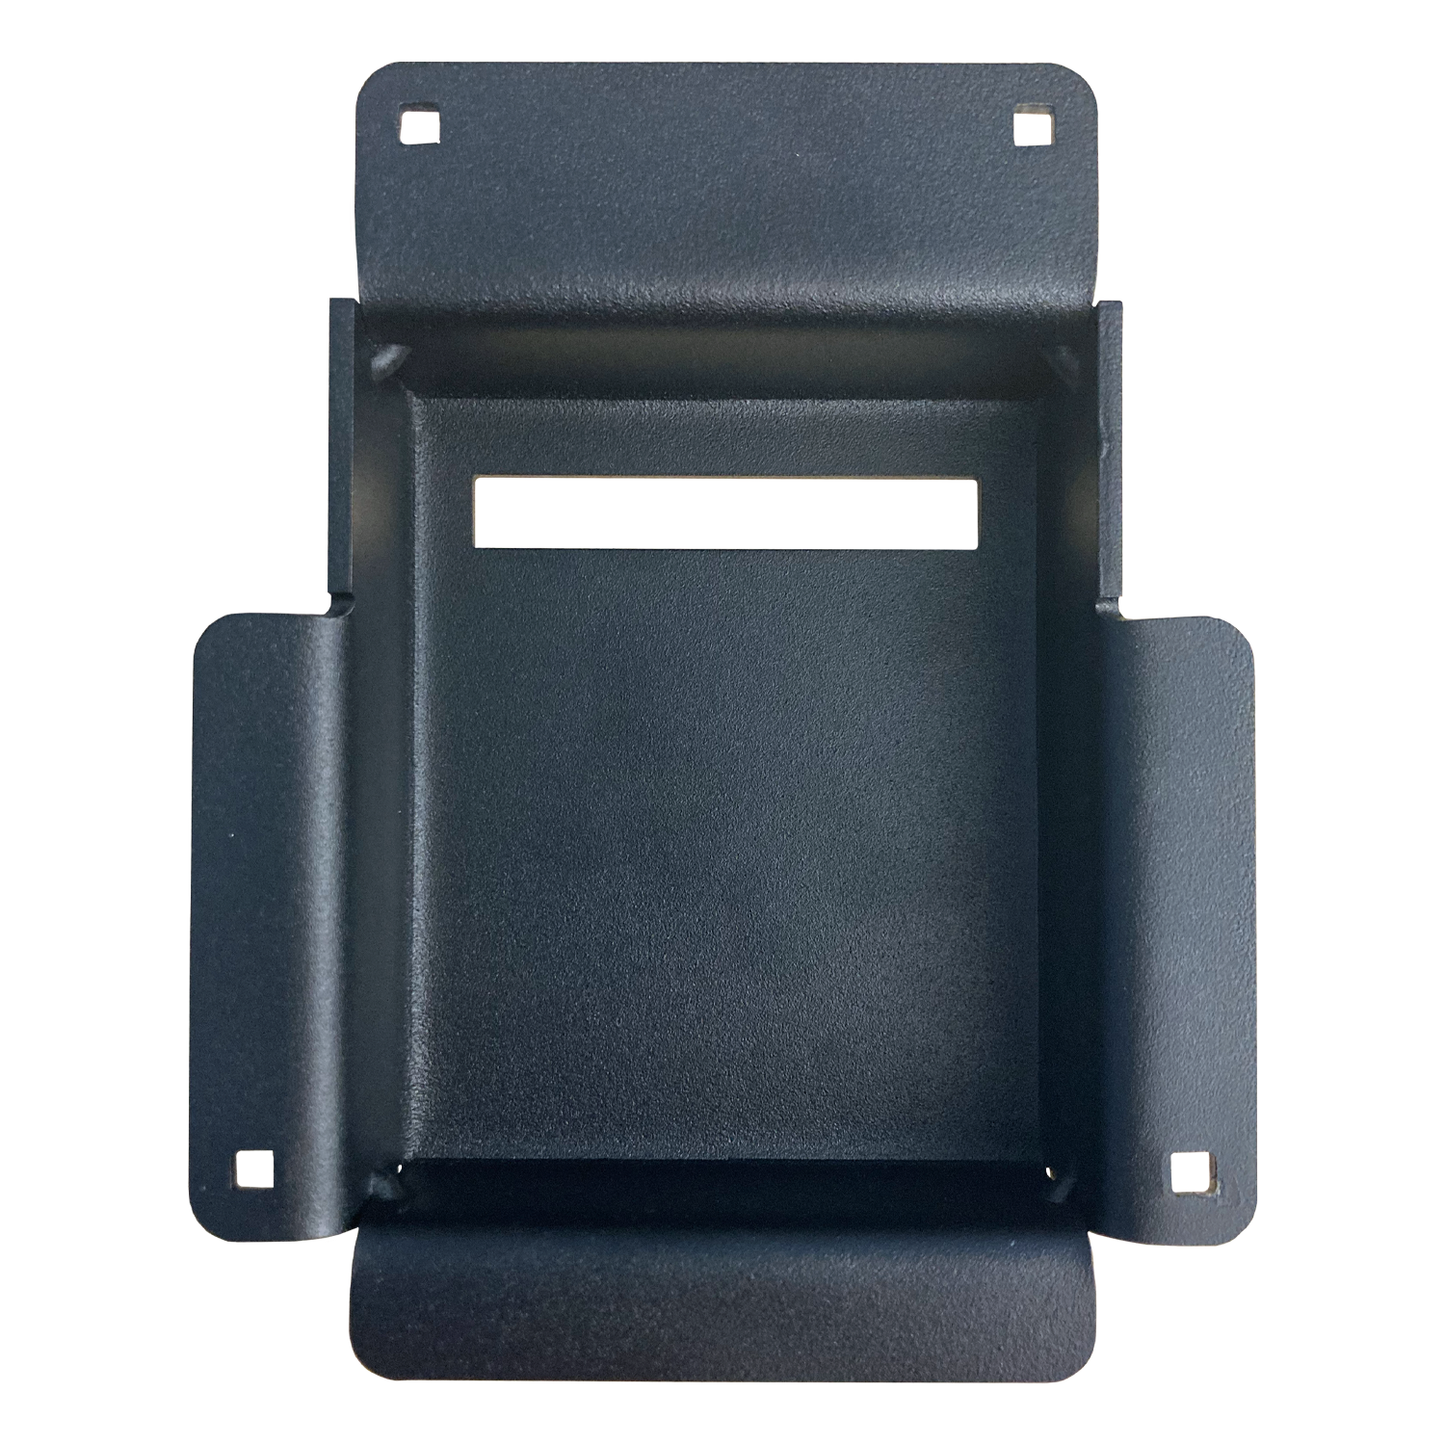 Add an extra layer of security to your Pennsylvania Skill machines with a Bill Acceptor Housing Plate. The Bill Acceptor Housing Plates are available for ICTs, JCMs, MEIs, and Spectra Bill Acceptors.